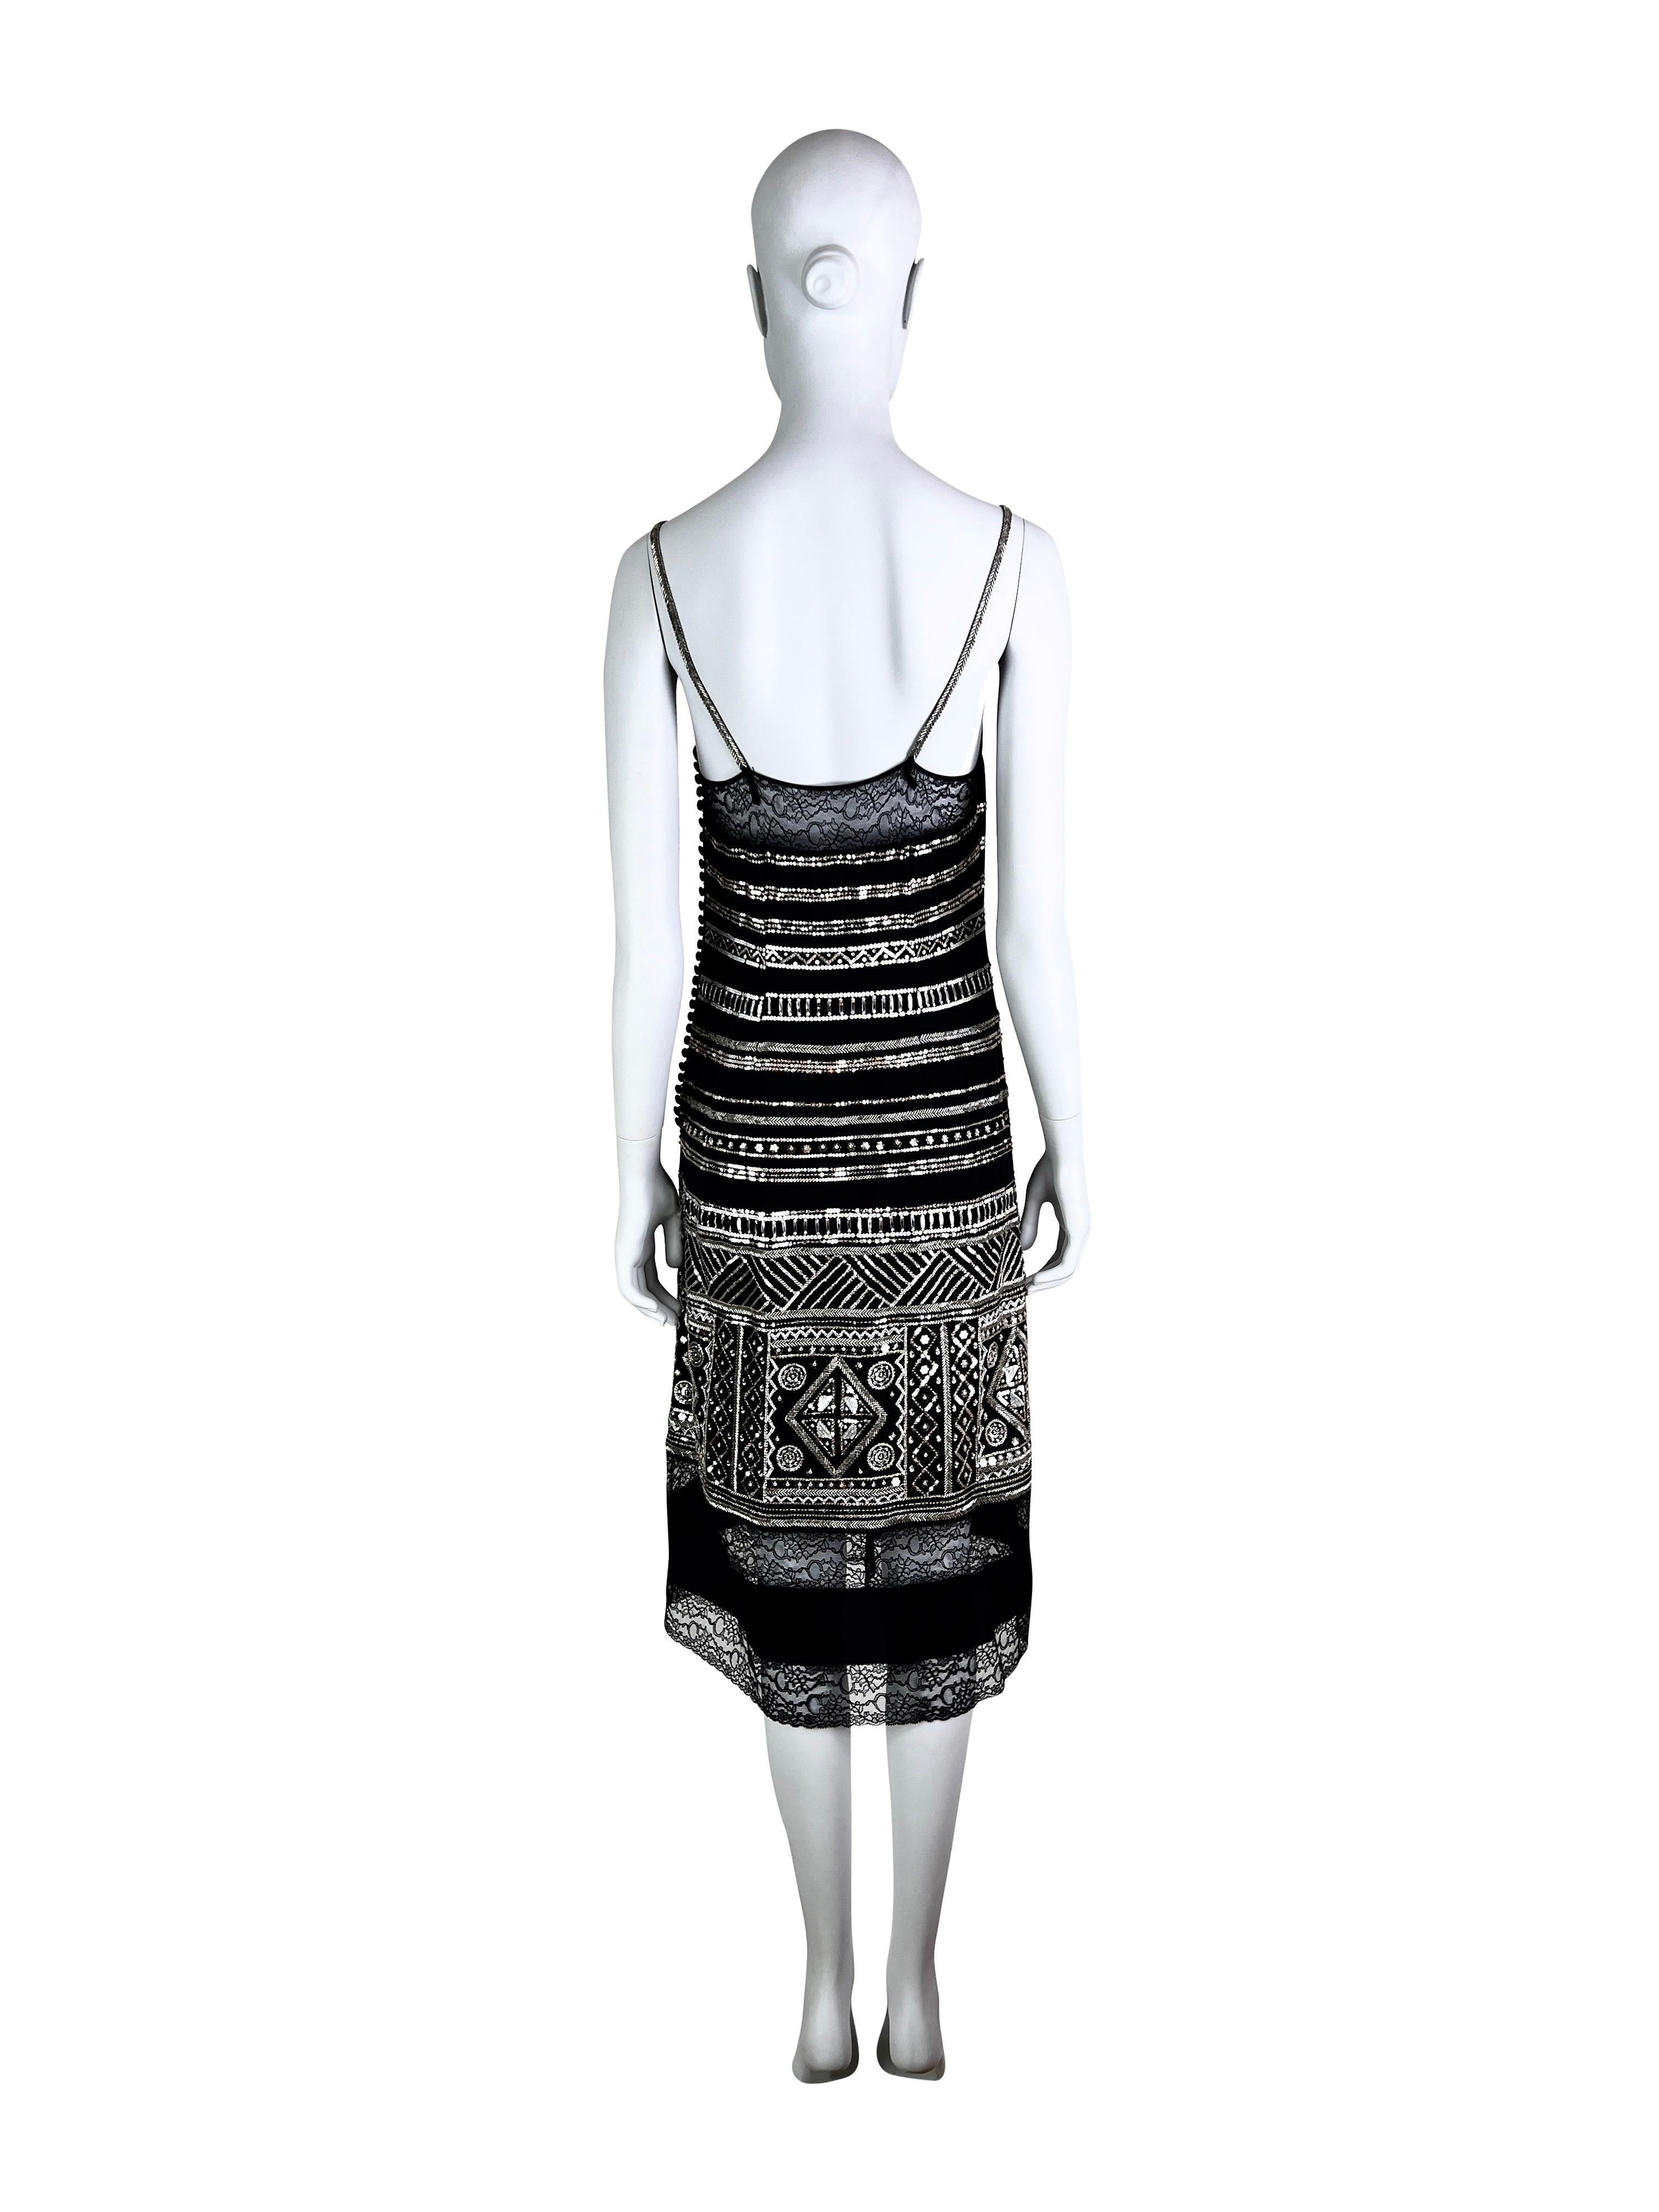 Women's Dior by John Galliano Spring 2006 Embellished and Beaded Silk Cami Dress  For Sale